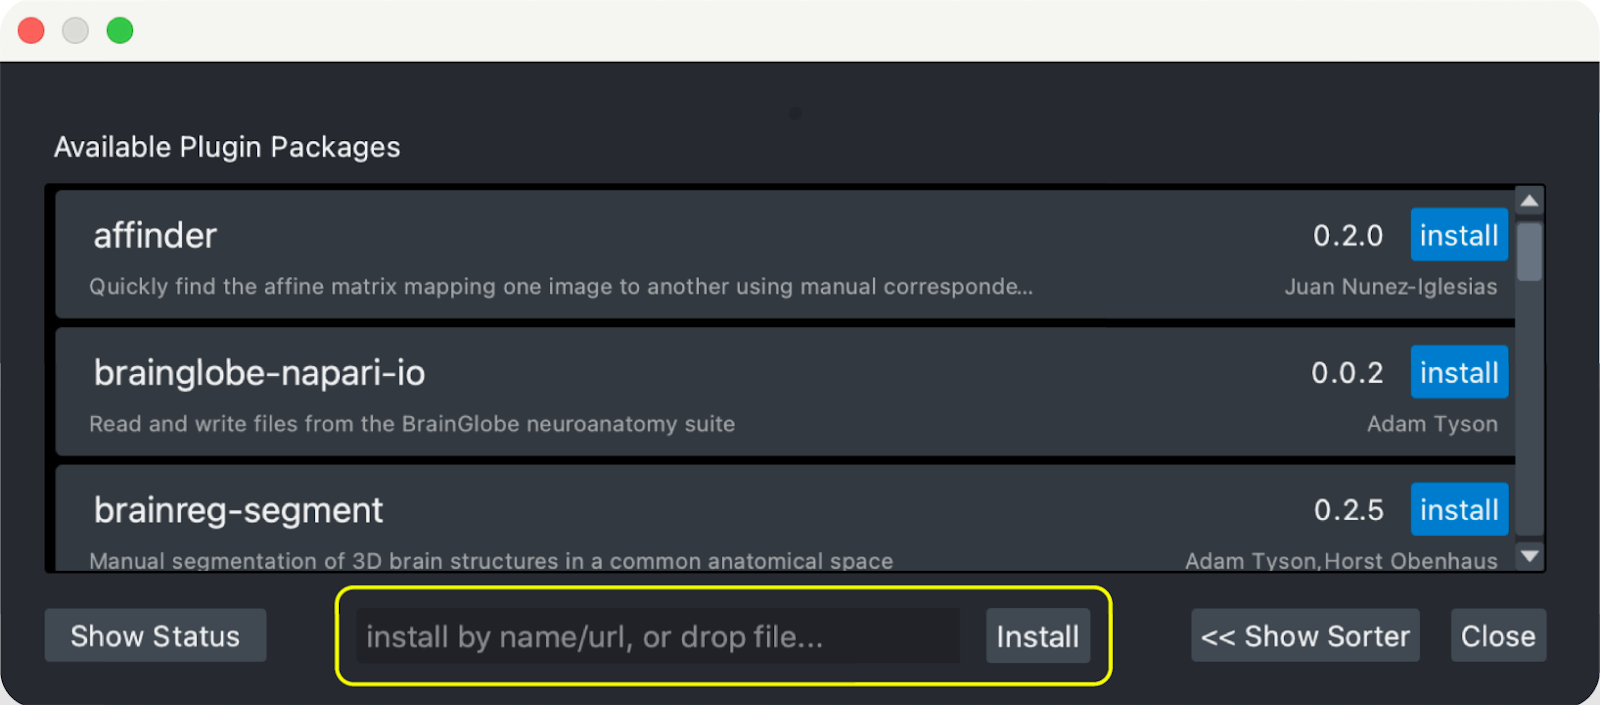 napari viewer's Plugin dialog. At the bottom of the dialog, there is a place to install by name, URL, or dropping in a file.